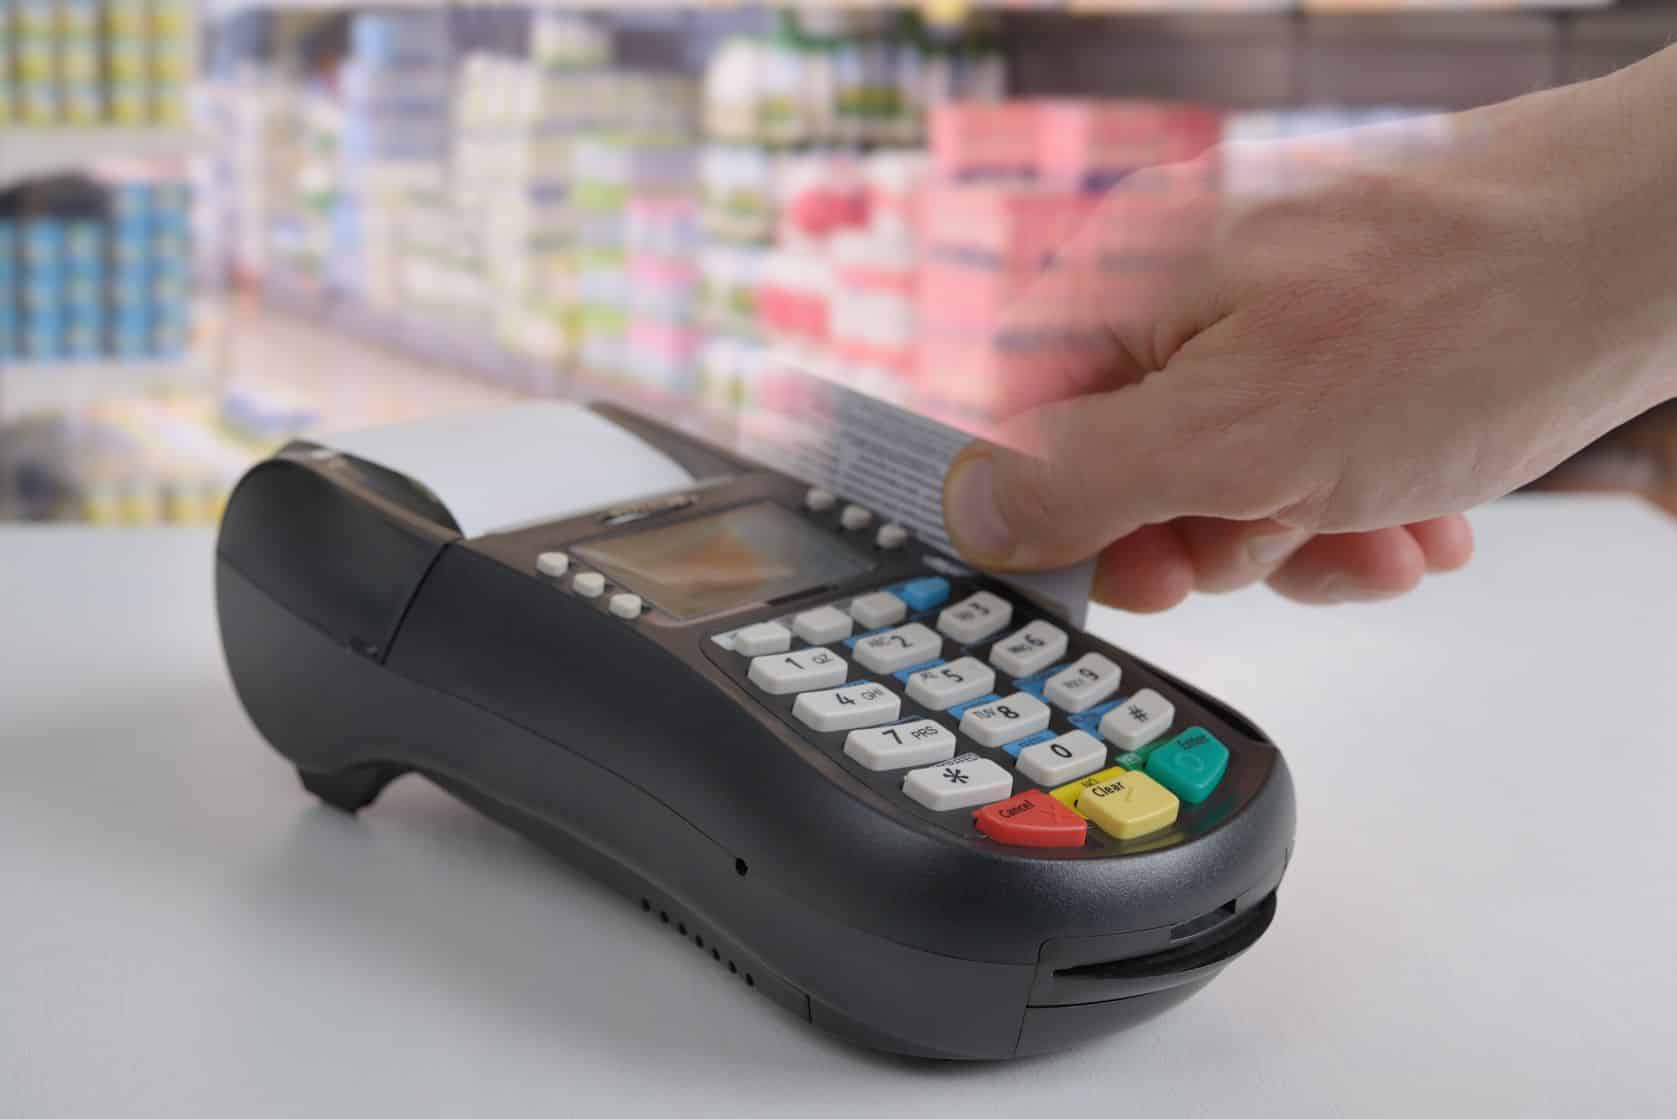 Point-of-Sale (PoS) malware